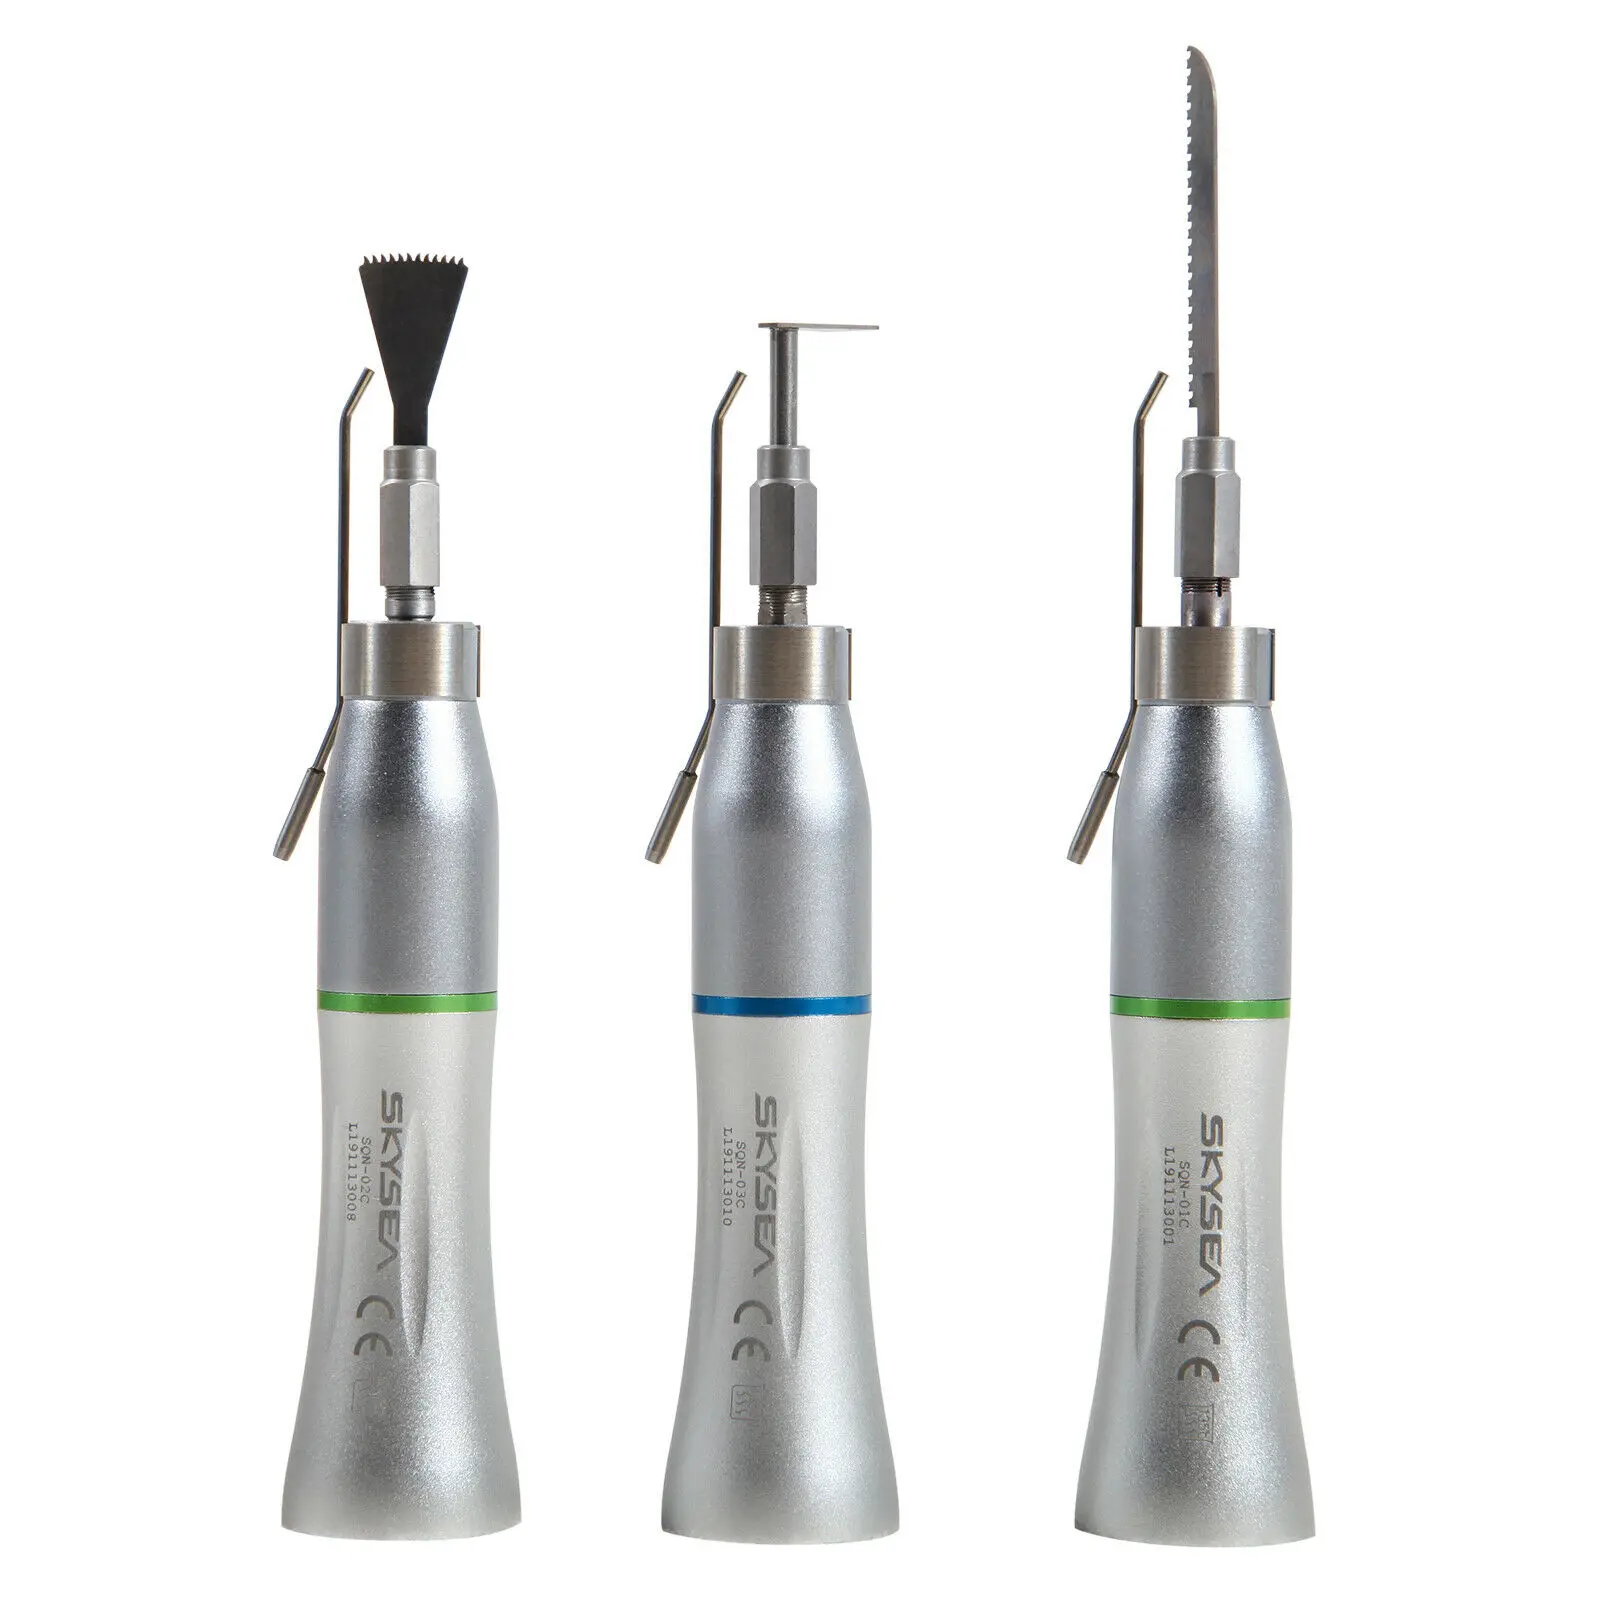 

Dental Micro 1:1/4:1 Surgical 3°/17° Saw Surgical Straight Low Speed Handpiece Oscillating Reciprocating